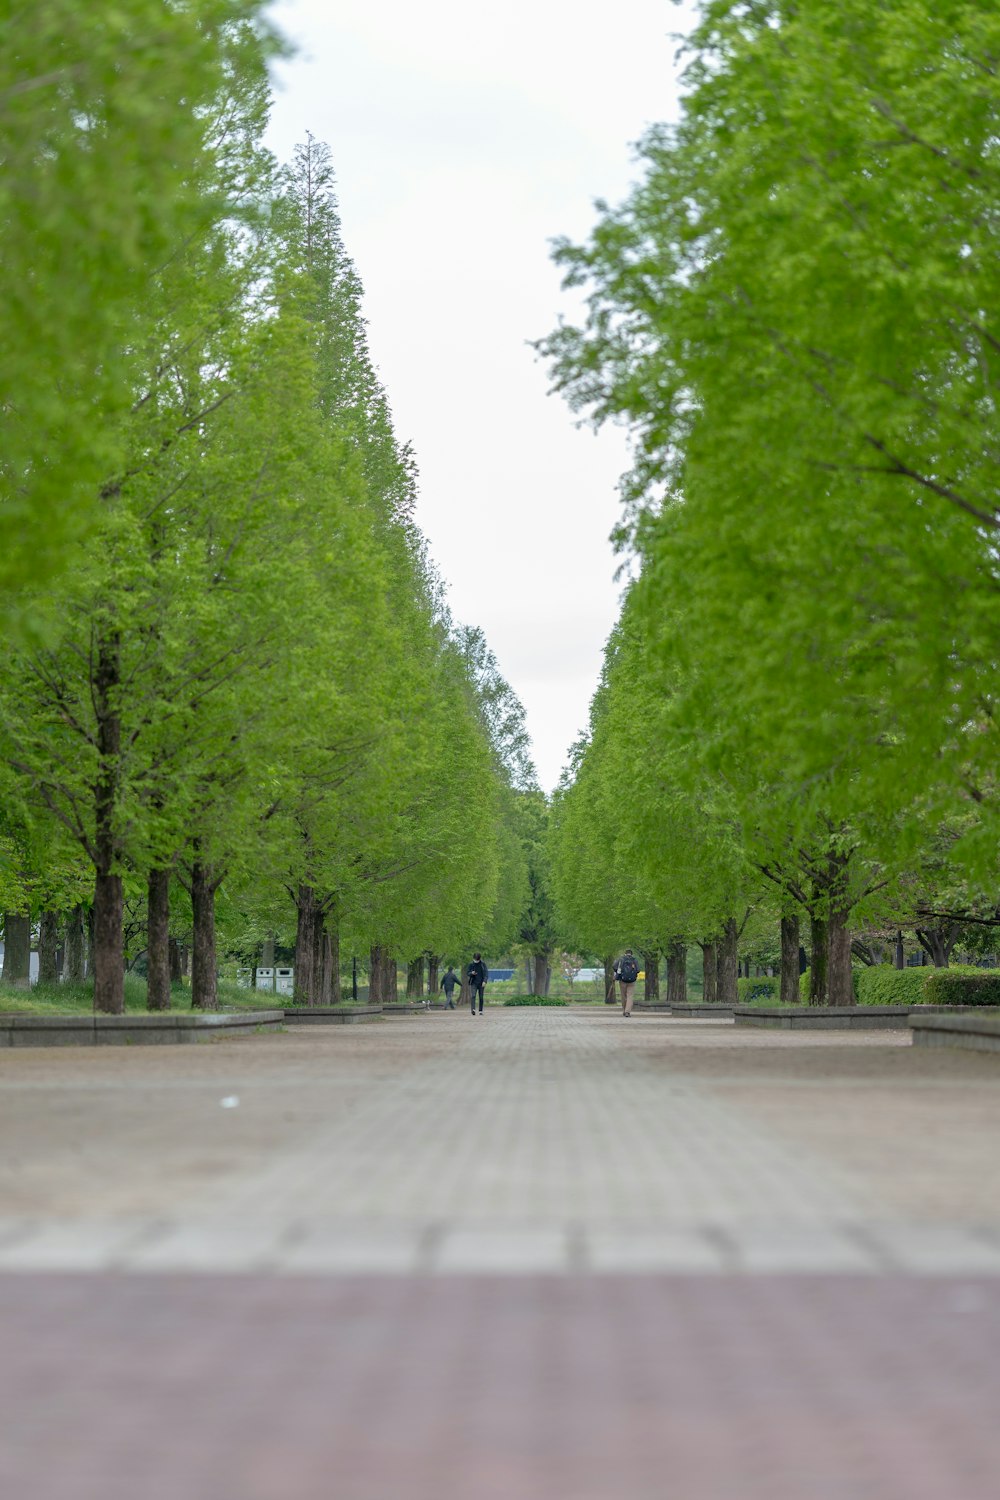 a person walking down a path lined with trees